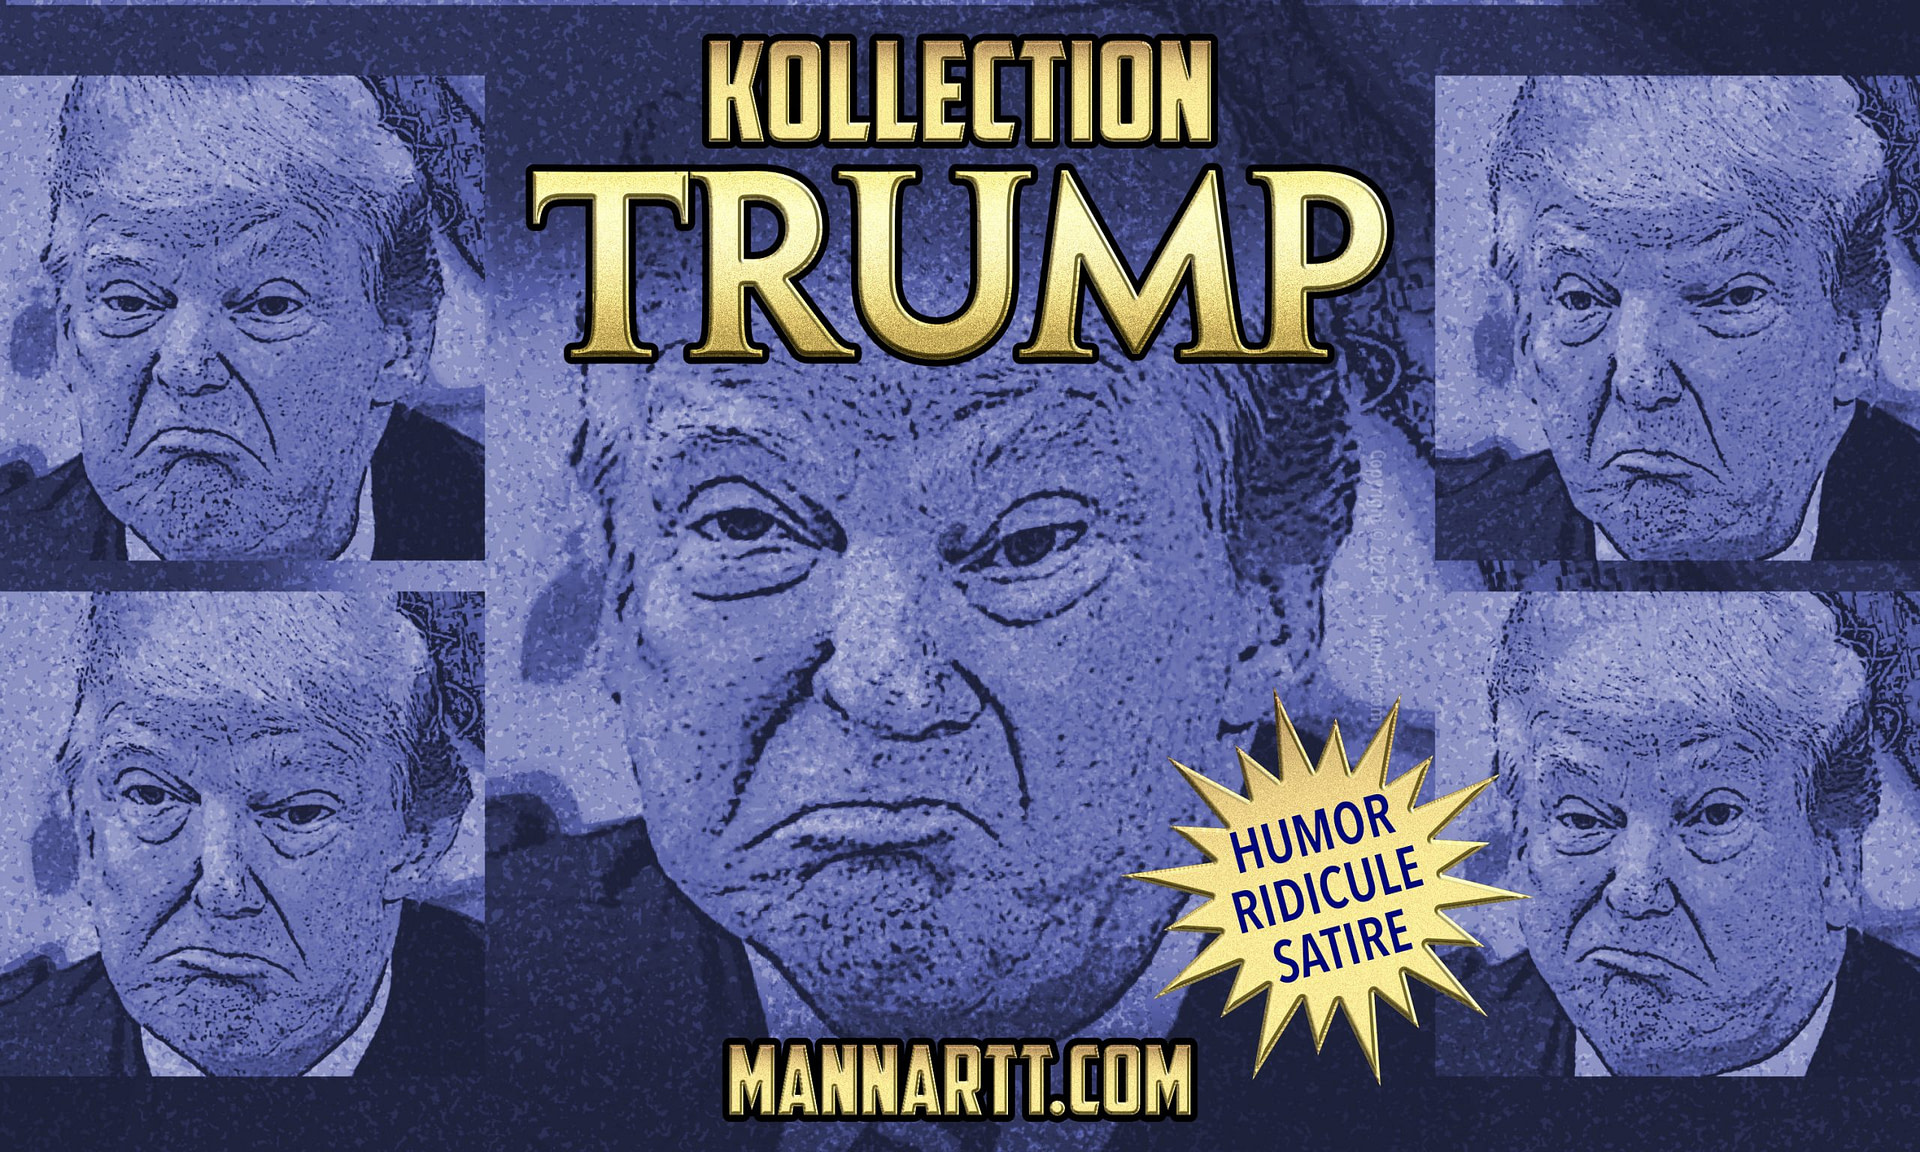 Kollection Trump: Art 4 the #ManBaby We Love to Hate 5